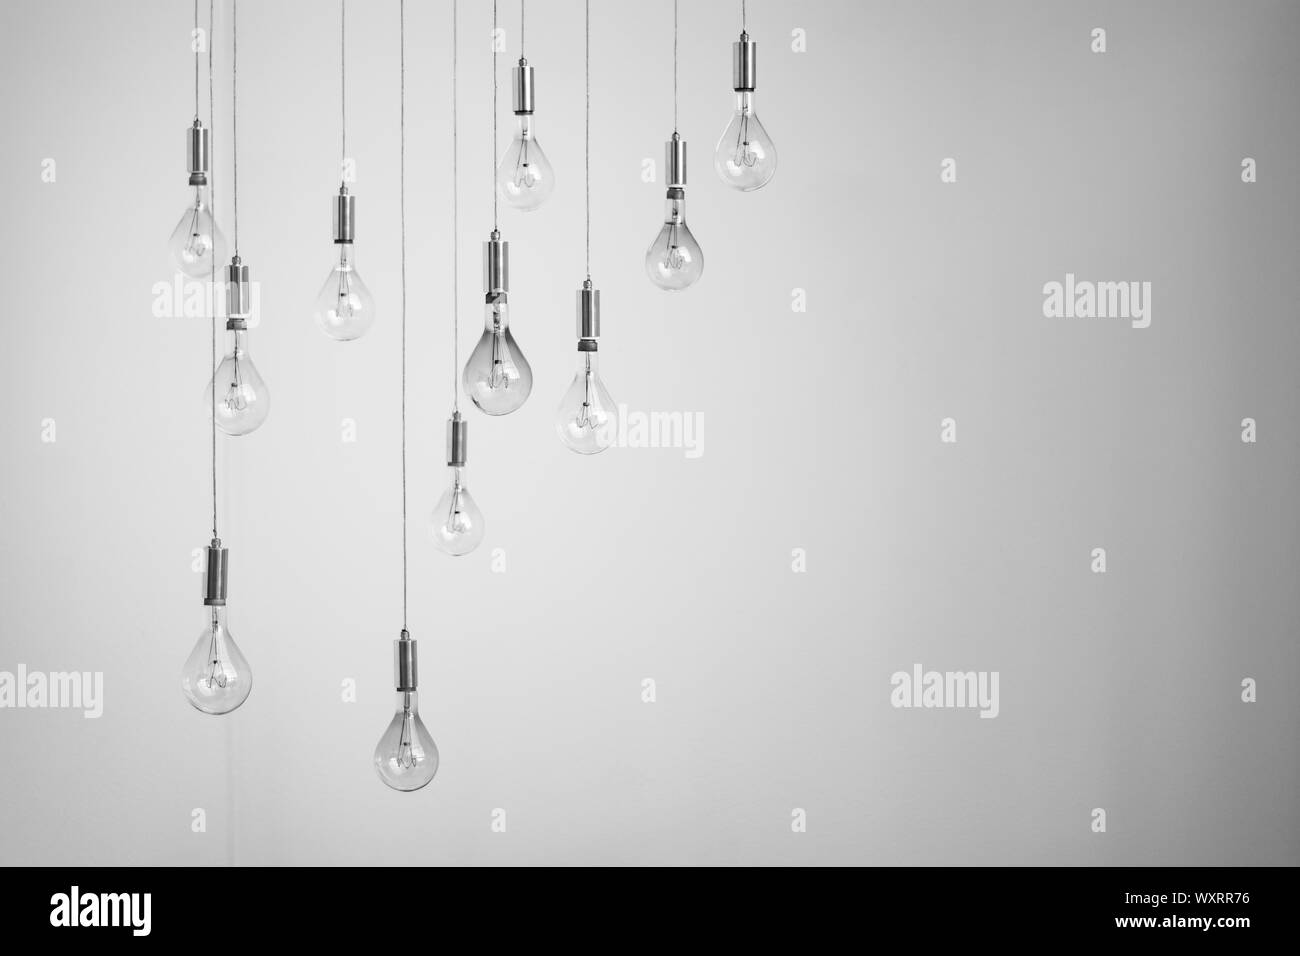 Conceptual luminaire with several hanging retro lamps Stock Photo